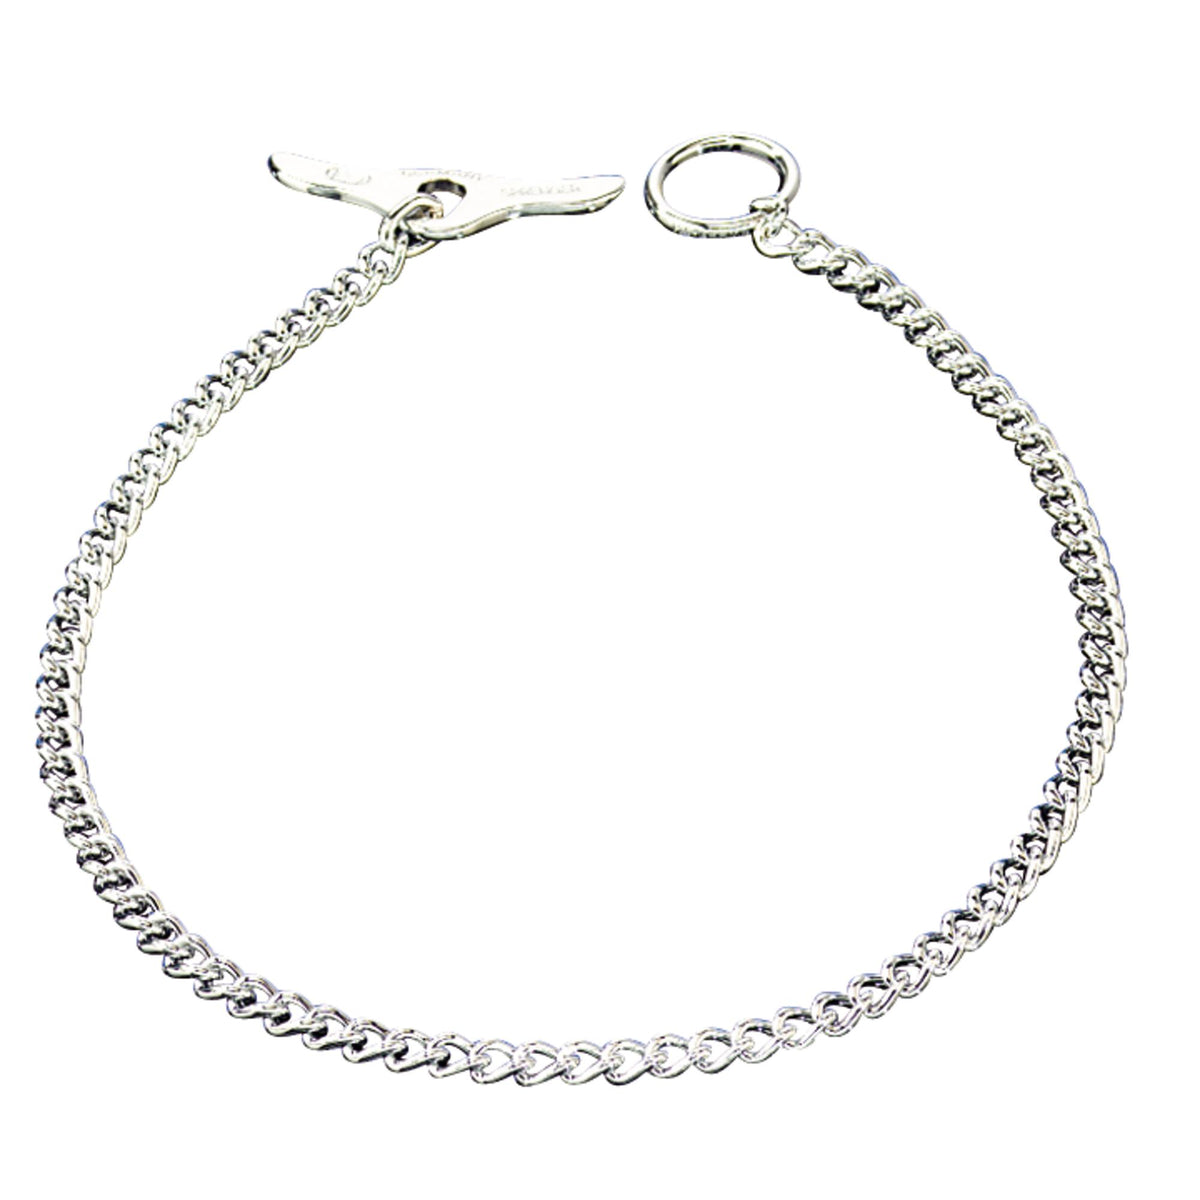 Herm Sprenger - Chain Collar with Toggle-Closure - Round Links - Chrom ...